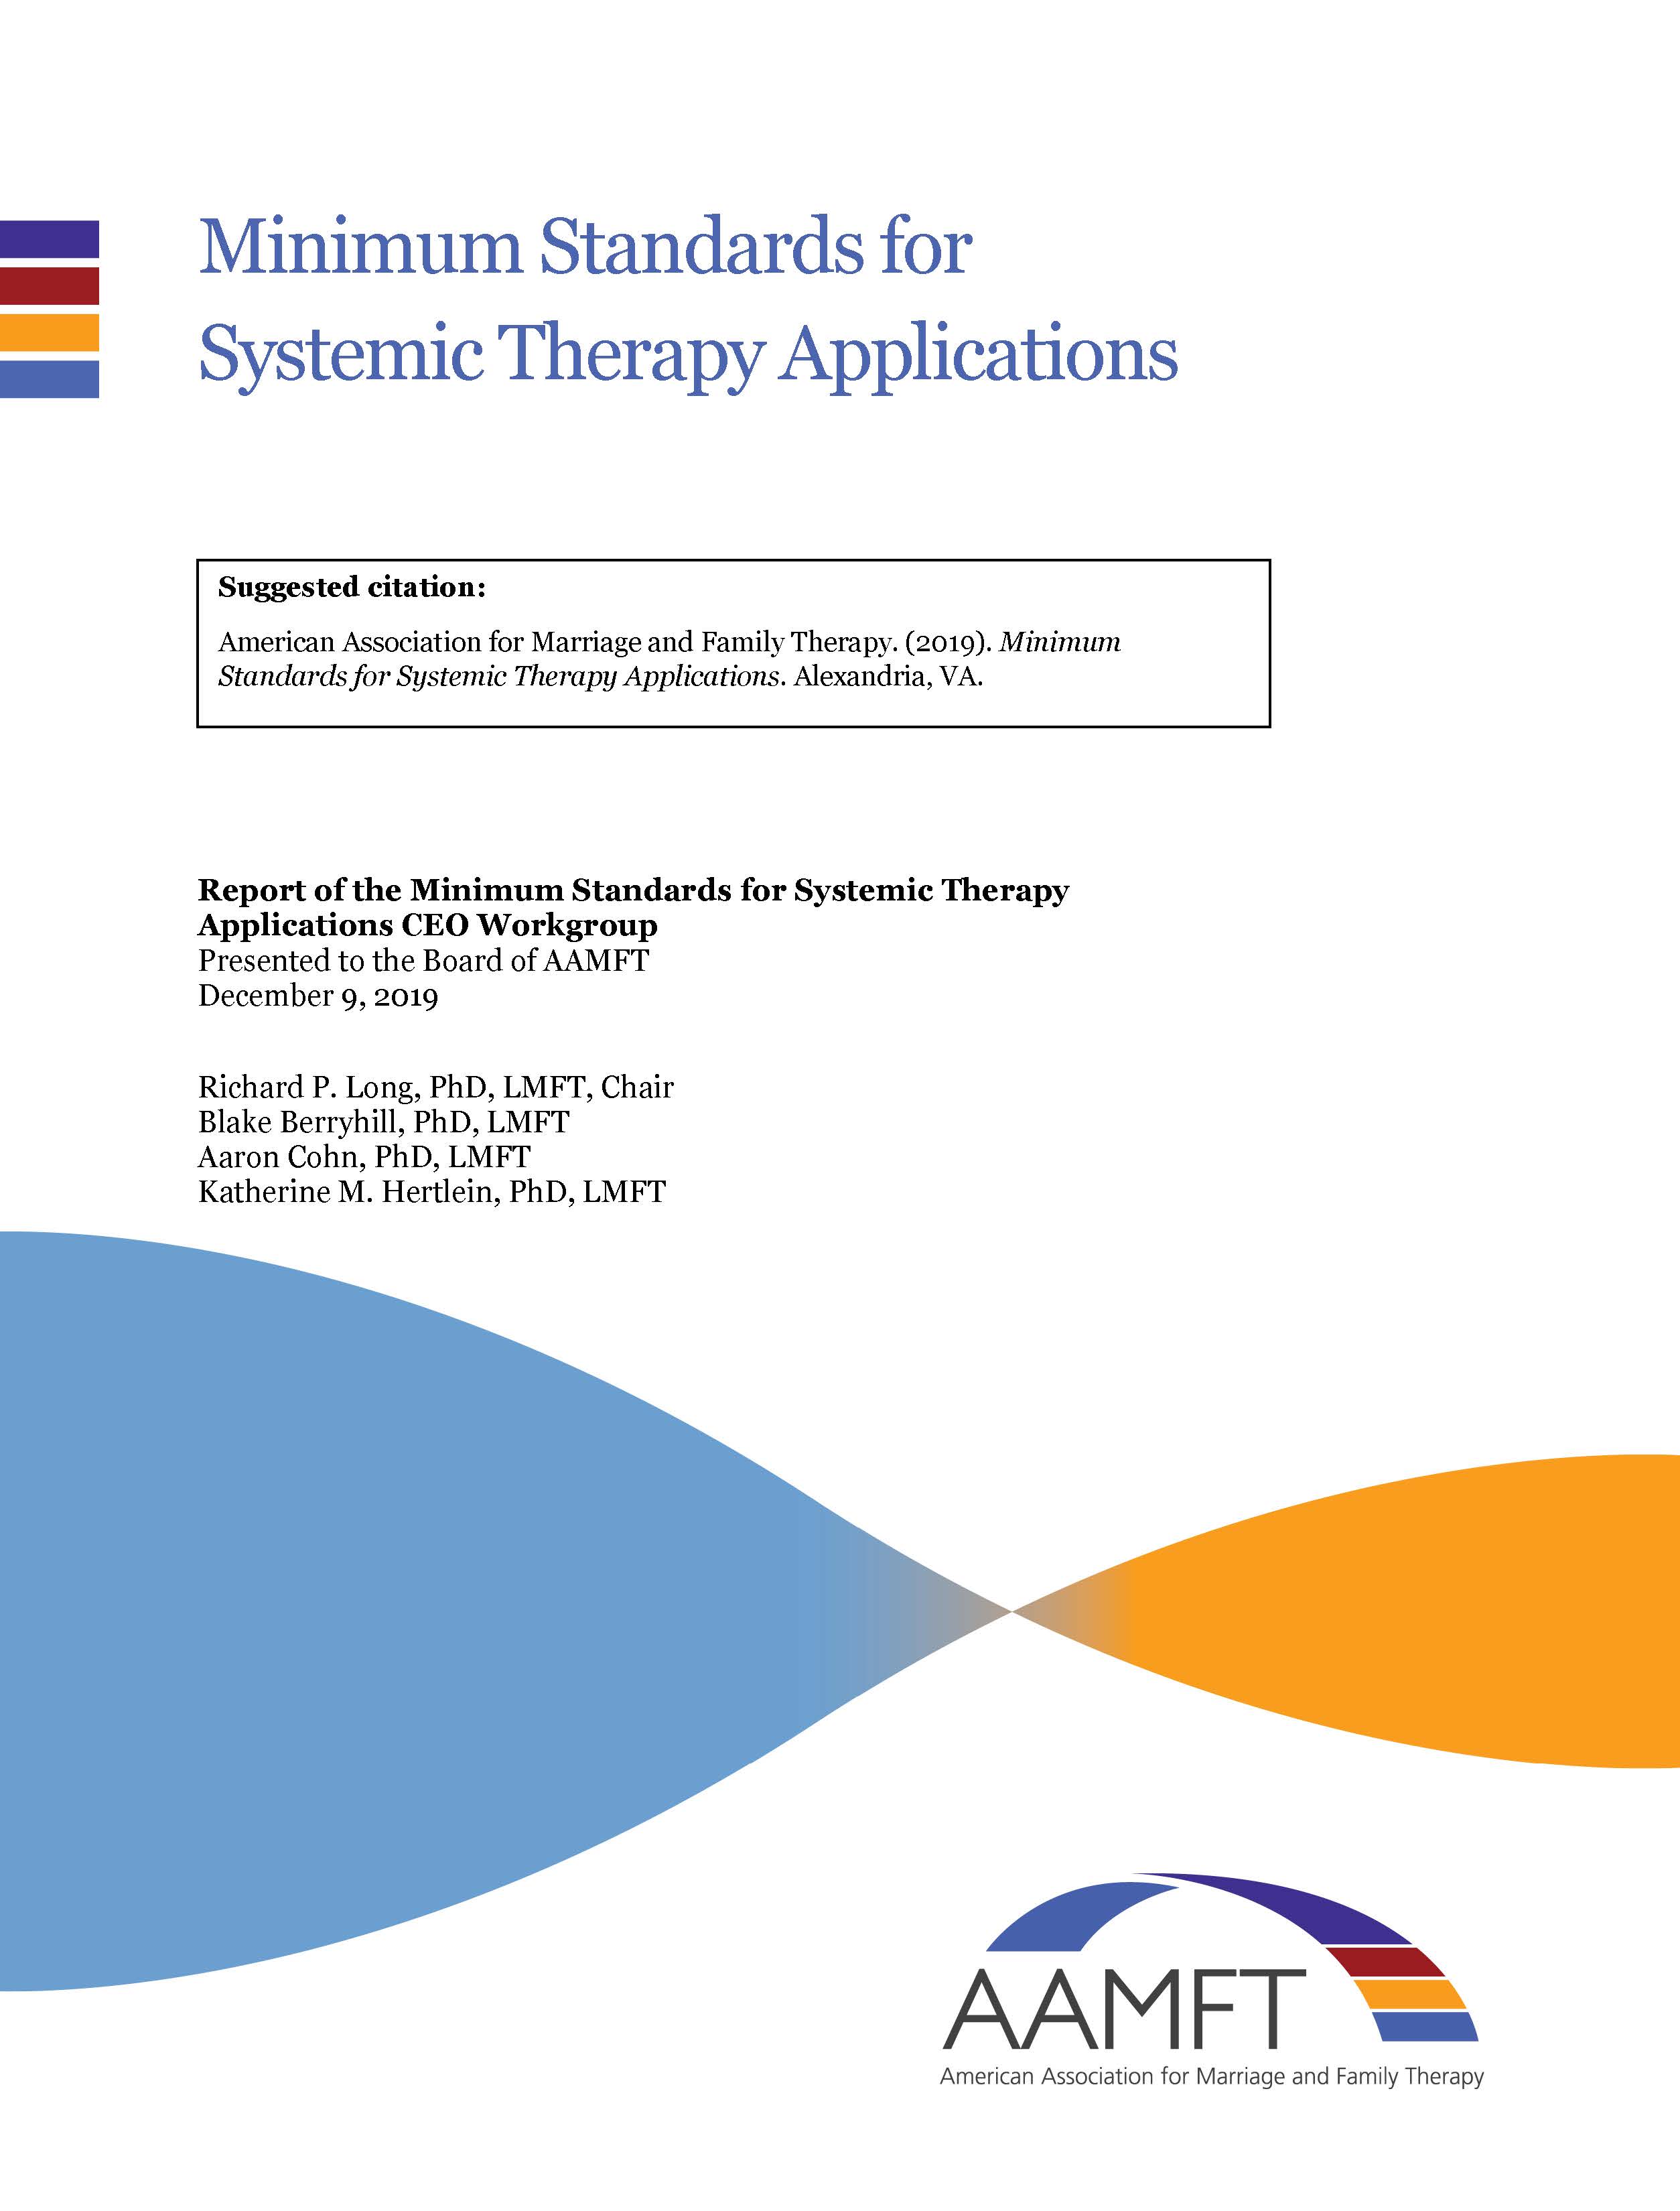 Minimum Standards for Systemic Therapy Applications